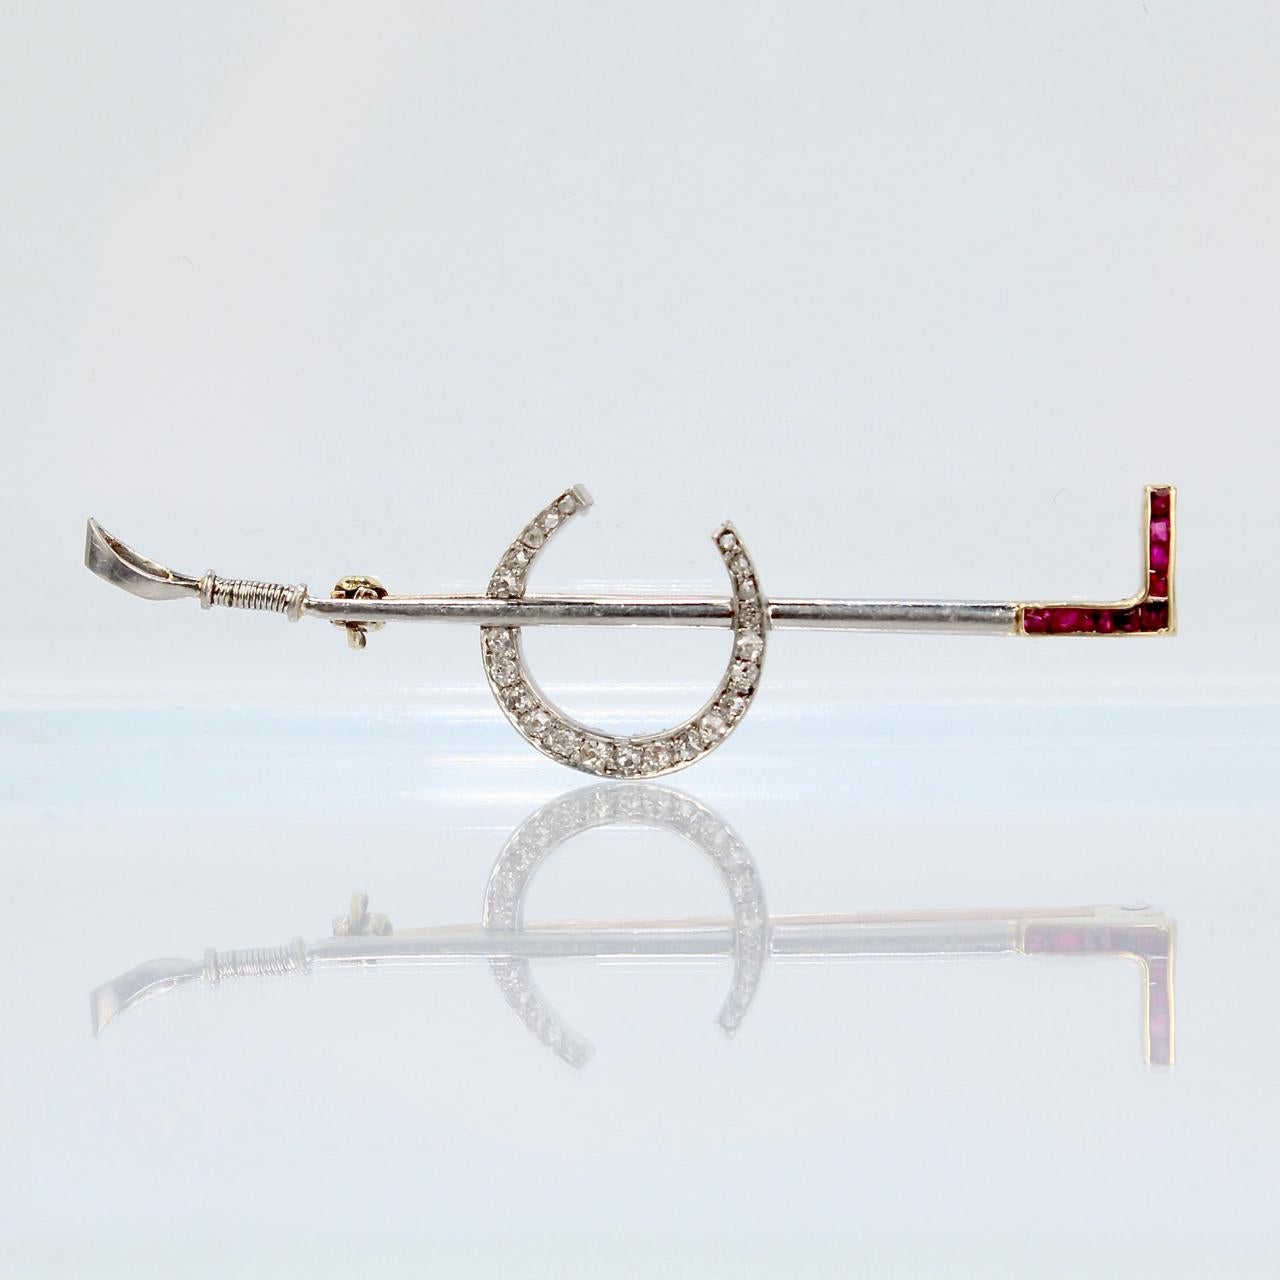 A very fine Art Deco riding crop and horse shoe pin or brooch.

In platinum-topped 14K gold with 16 small diamonds and 6 small baguette rubies.

Marked to the reverse 14k for gold fineness.

Simply a finely crafted brooch! The perfect gift for those